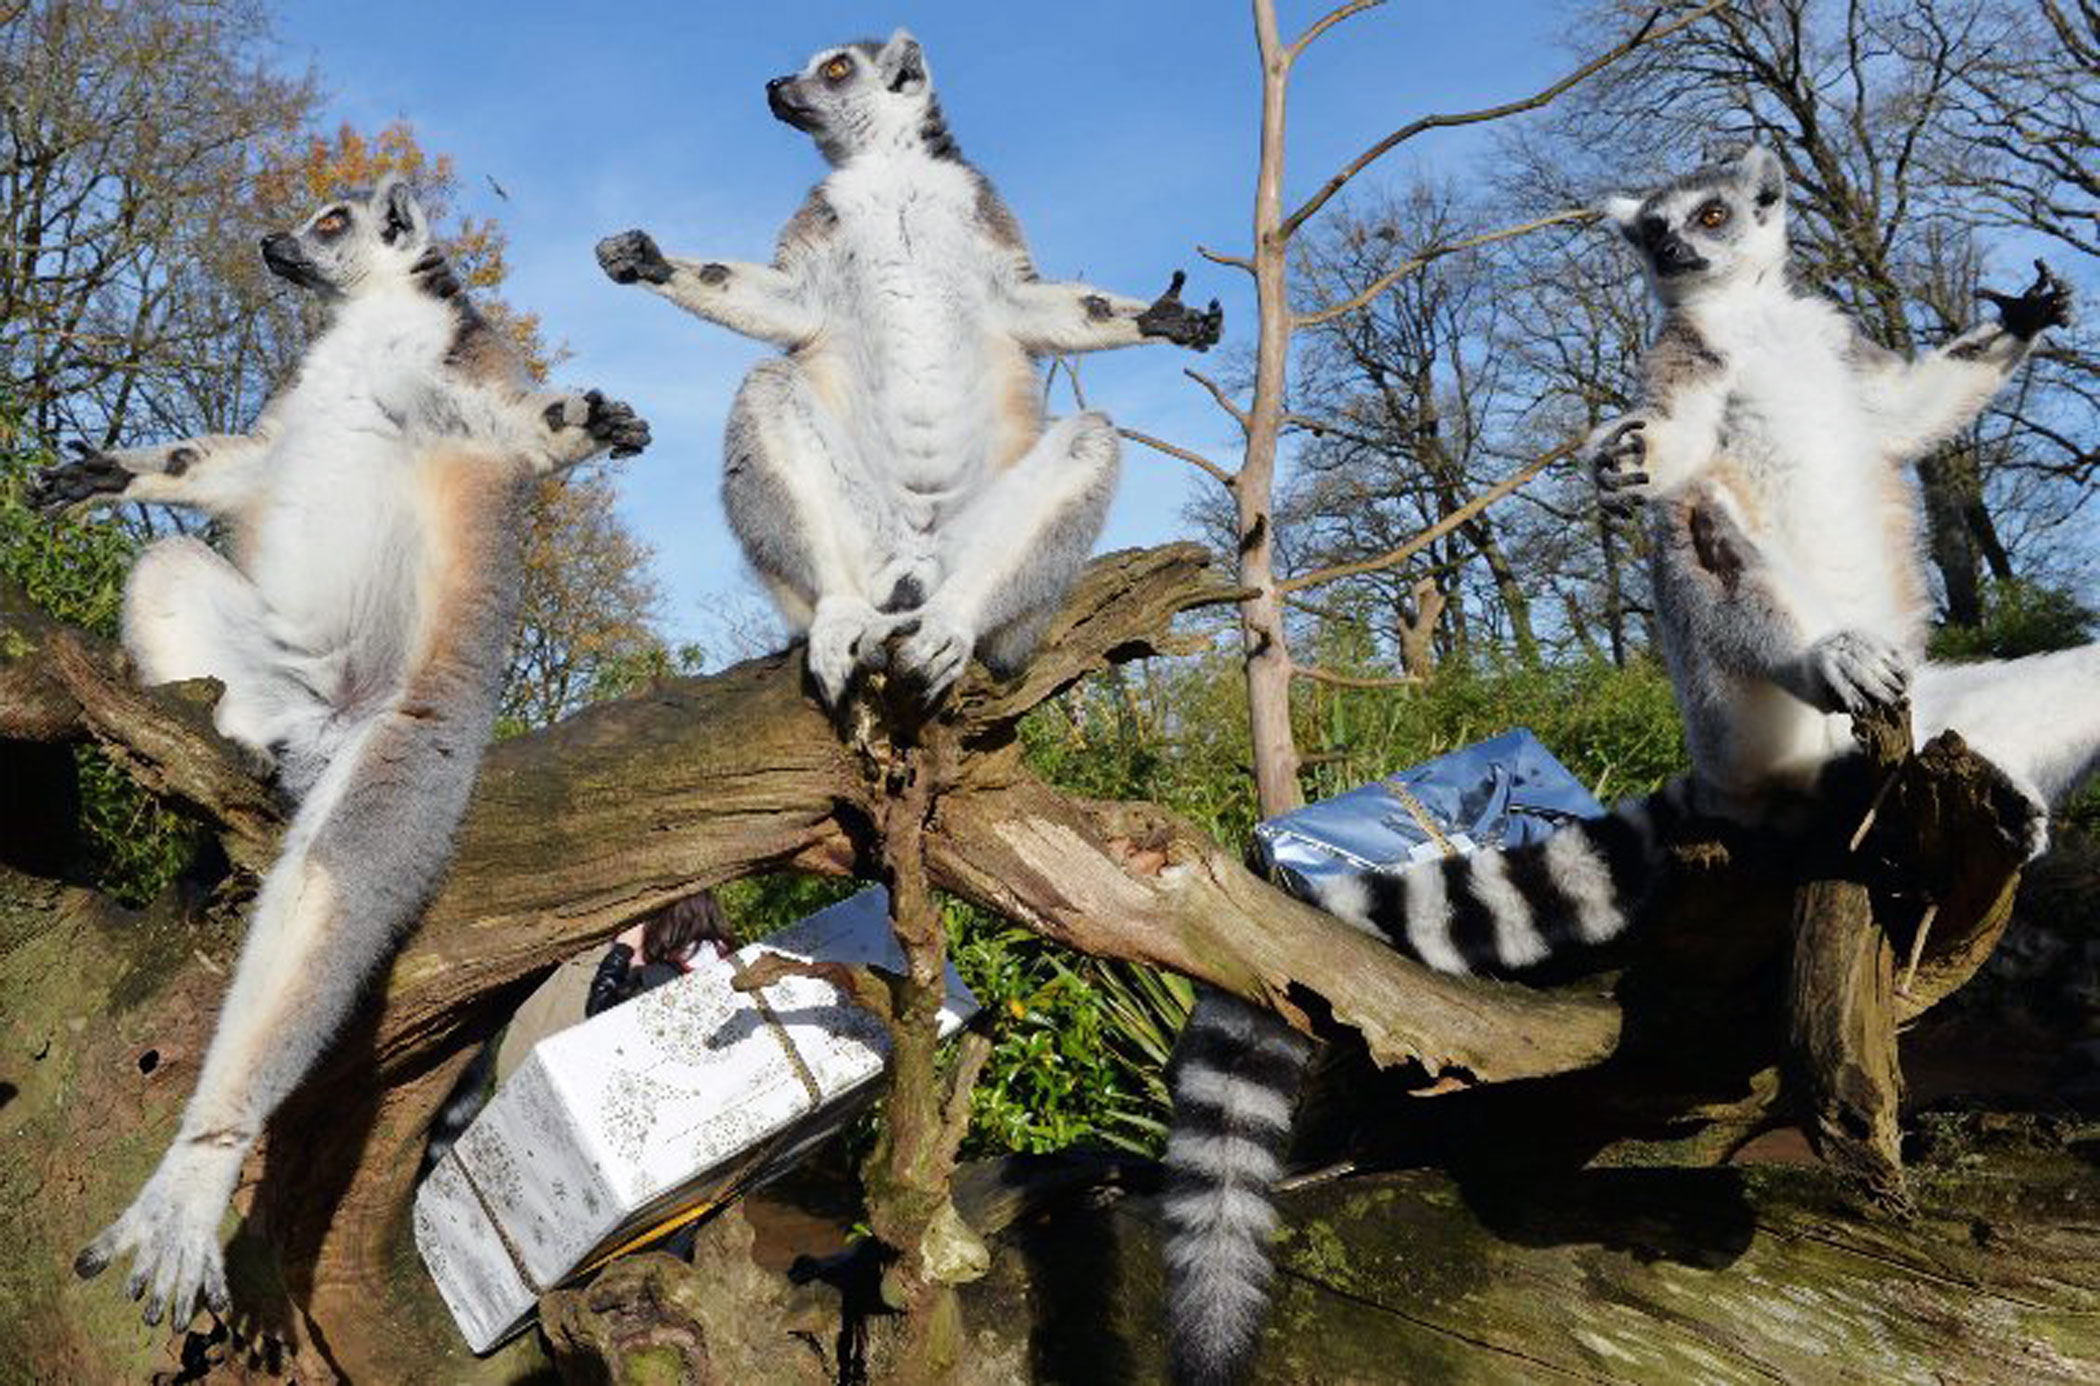 A group of lemurs prepare to open a Christmas package filled with food on Dec. 23, 2015 at the zoo in La Fleche, northwestern France.